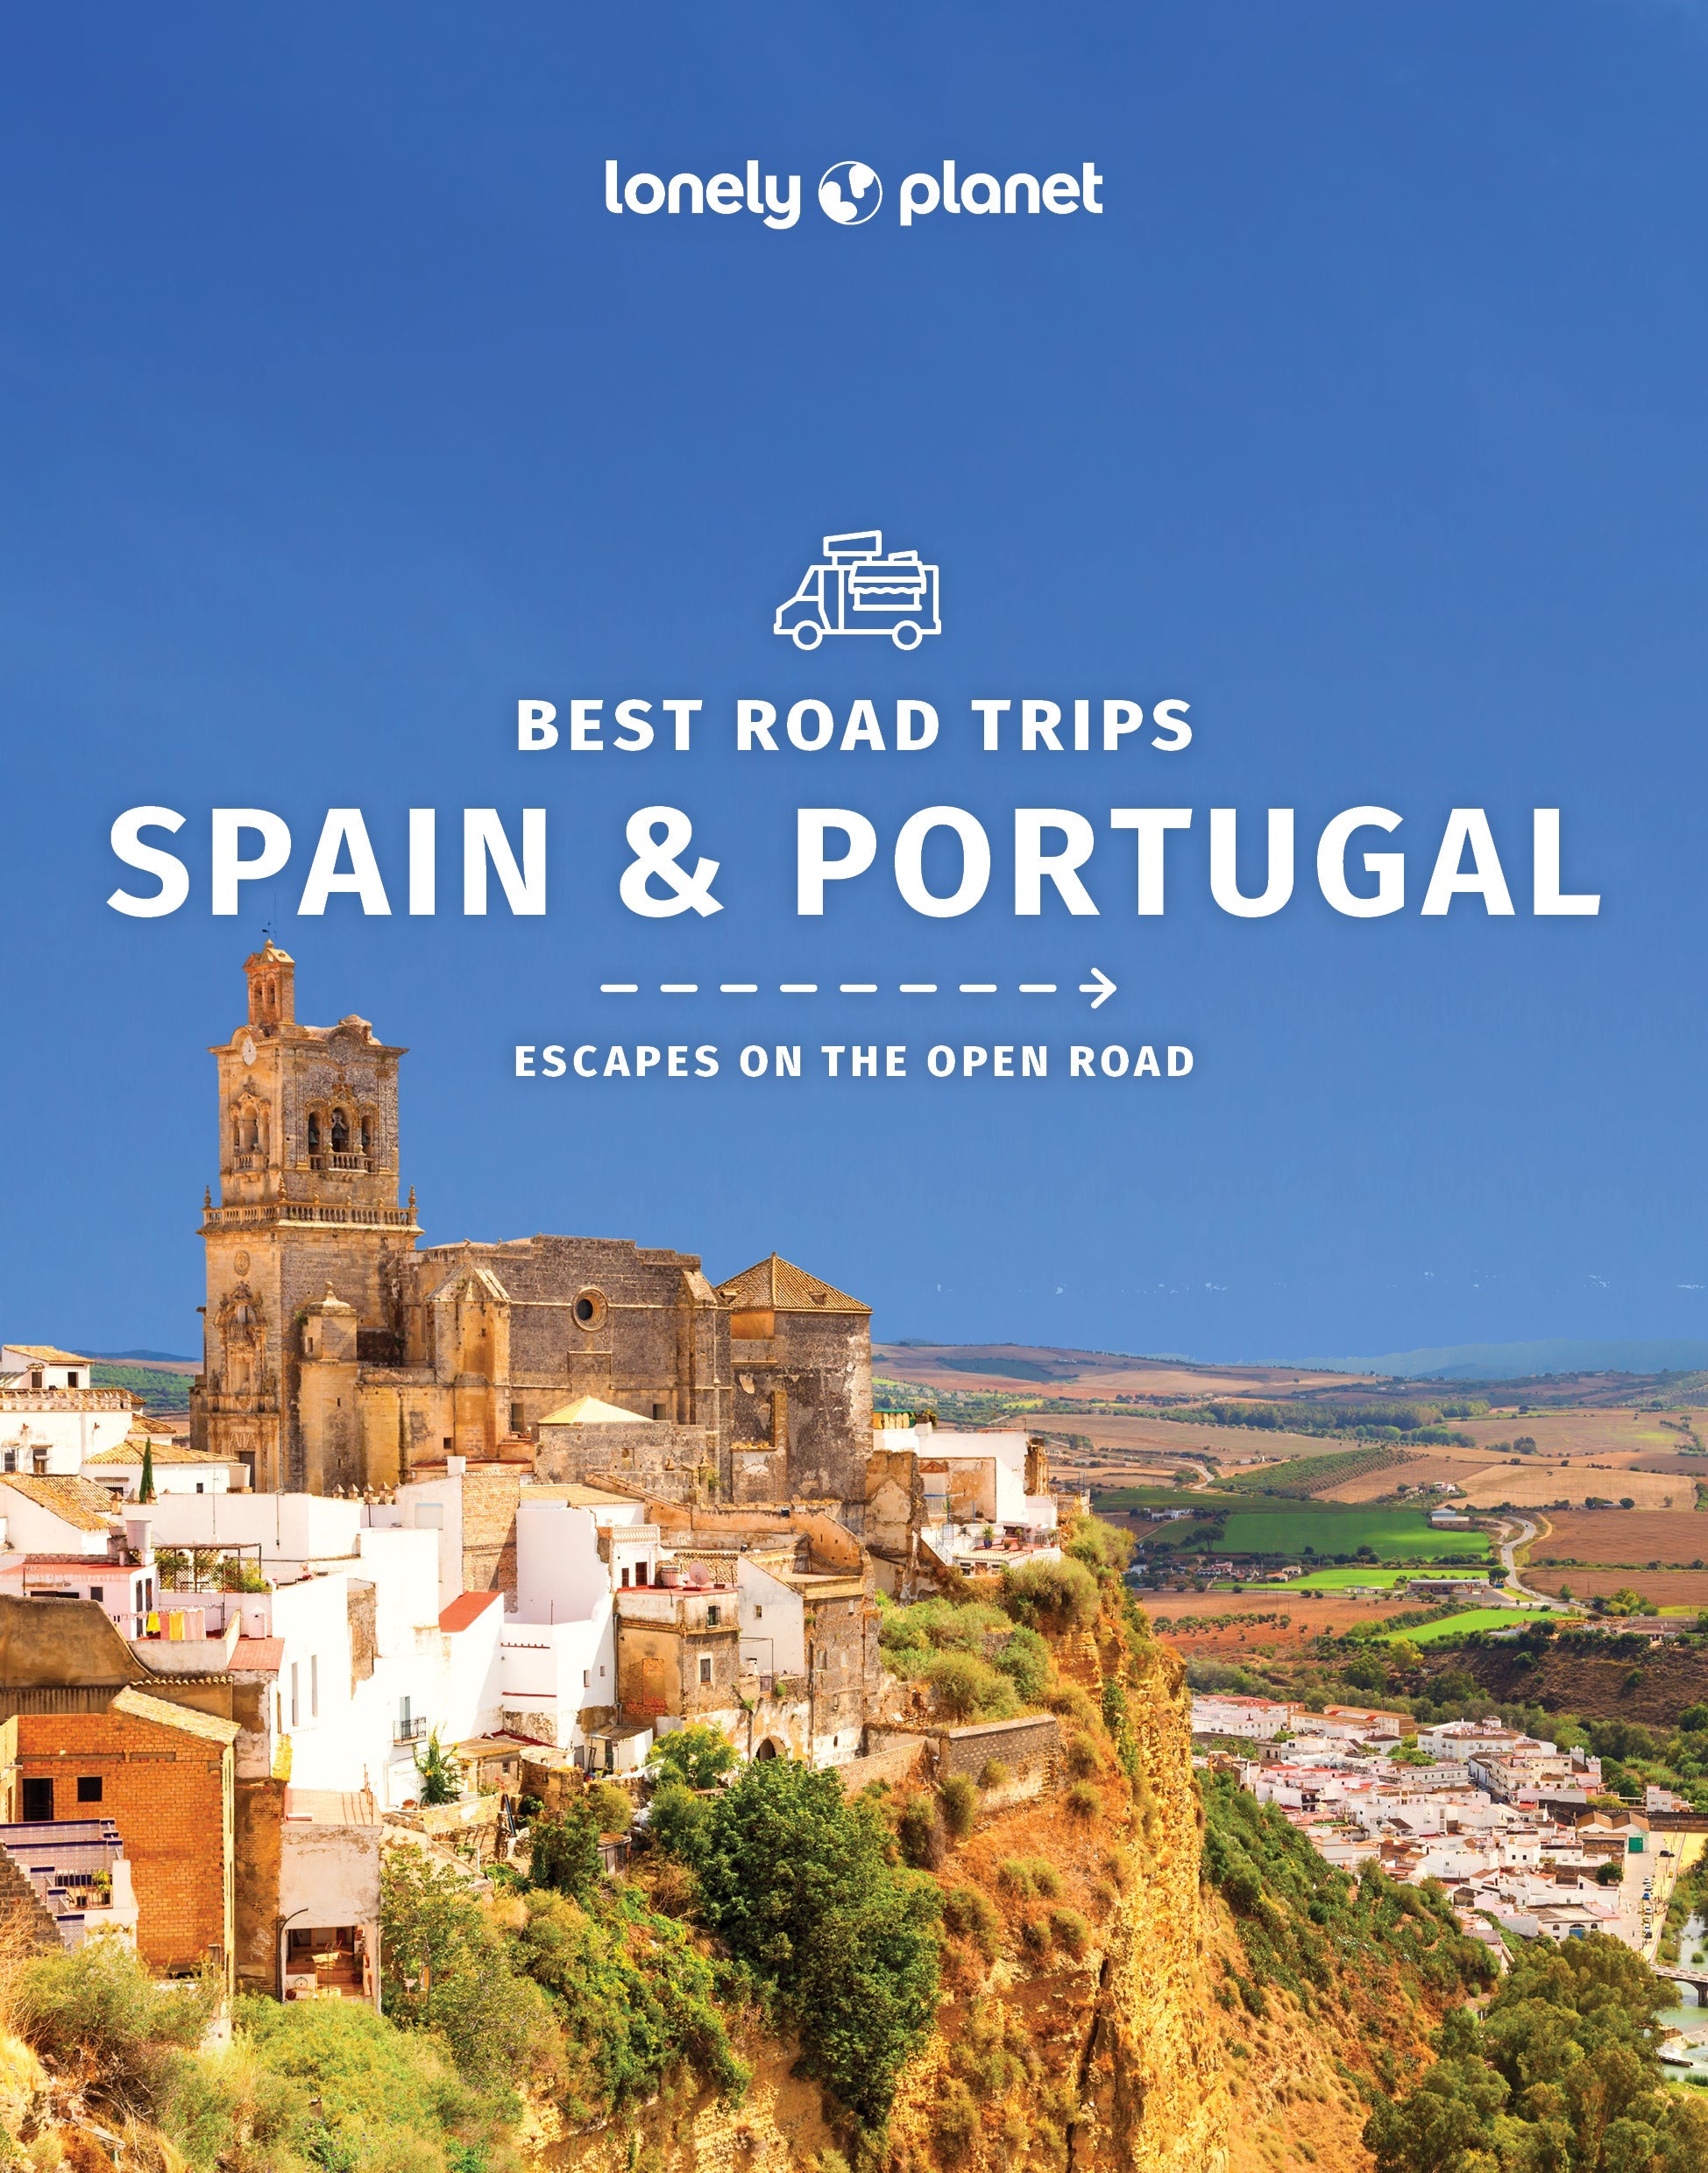 Best　Lonely　Planet　Planet　Guide　Lonely　Spain　Portugal's　Travel　Trips　Shop